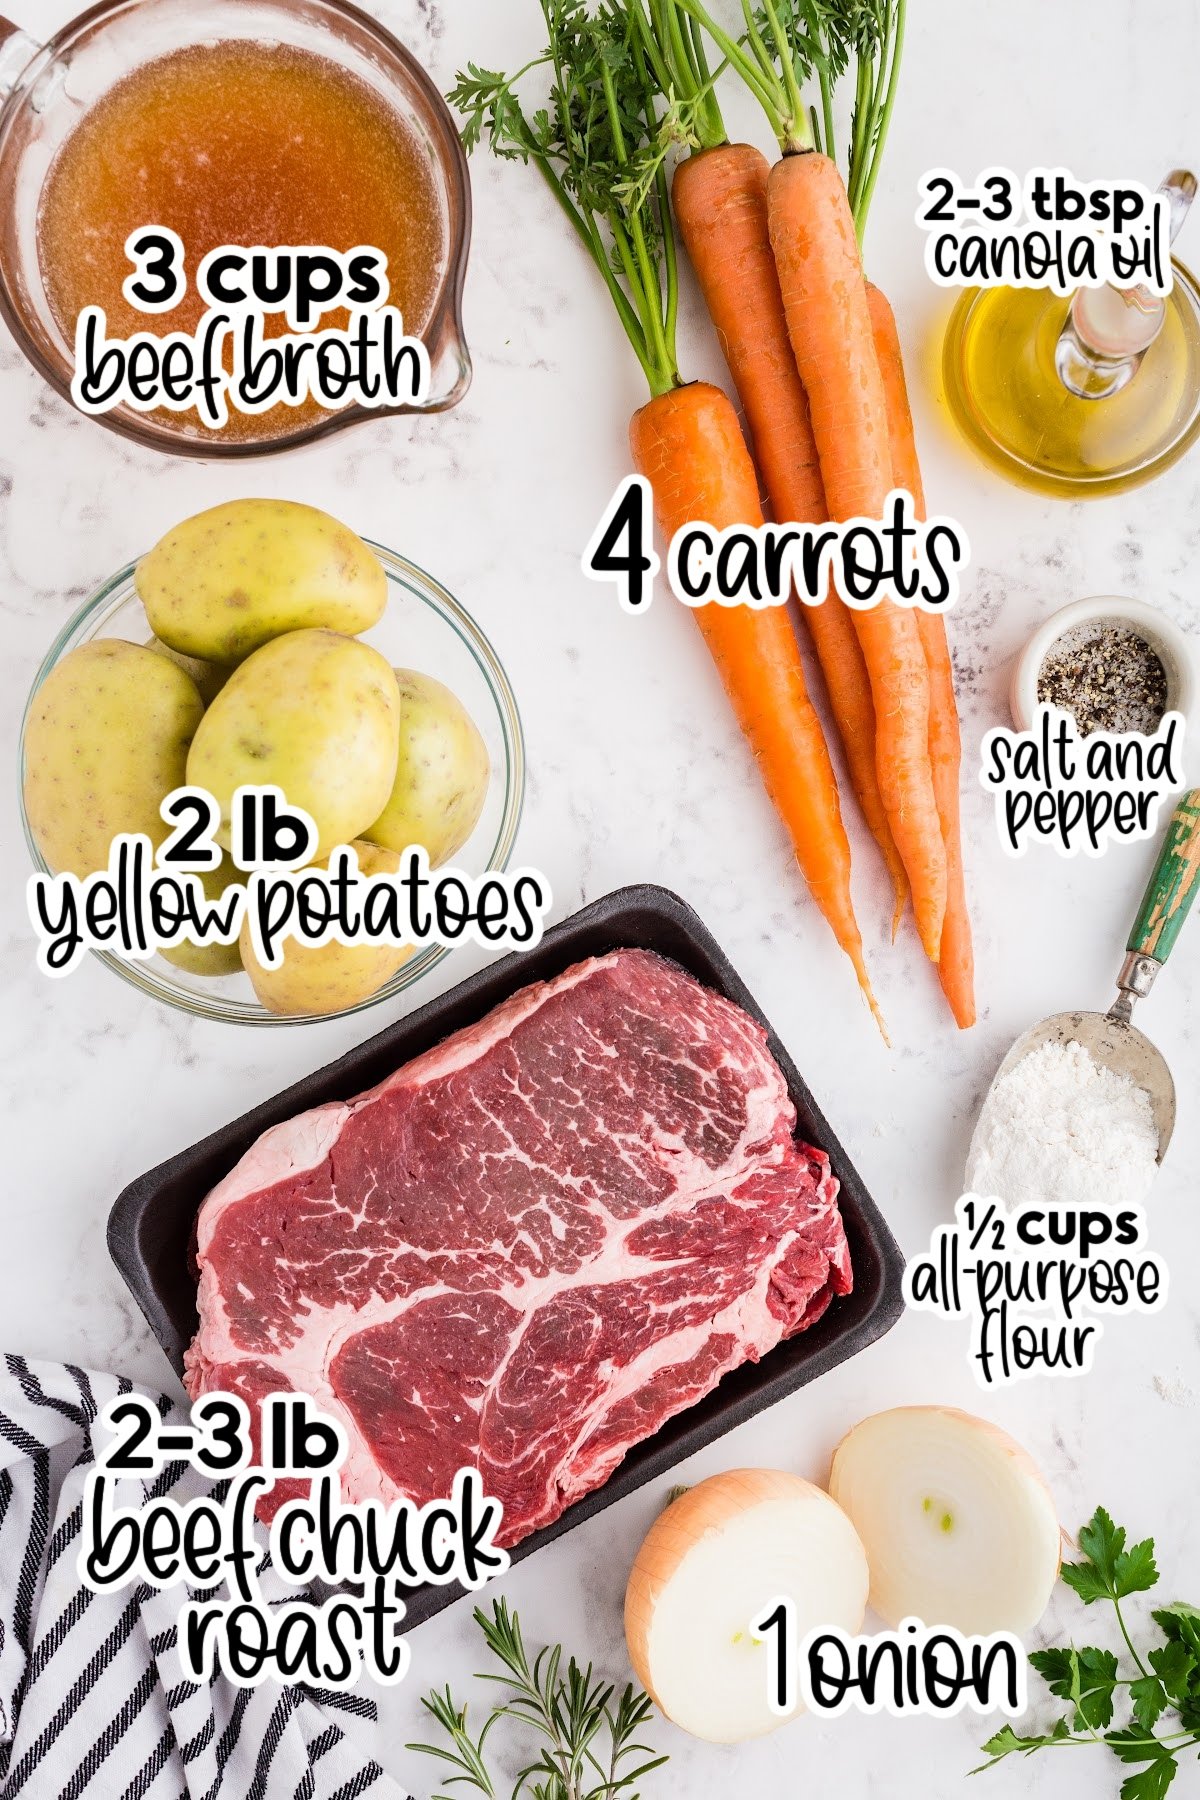 Individual ingredients for this pot roast recipe set out with text labels and amounts.